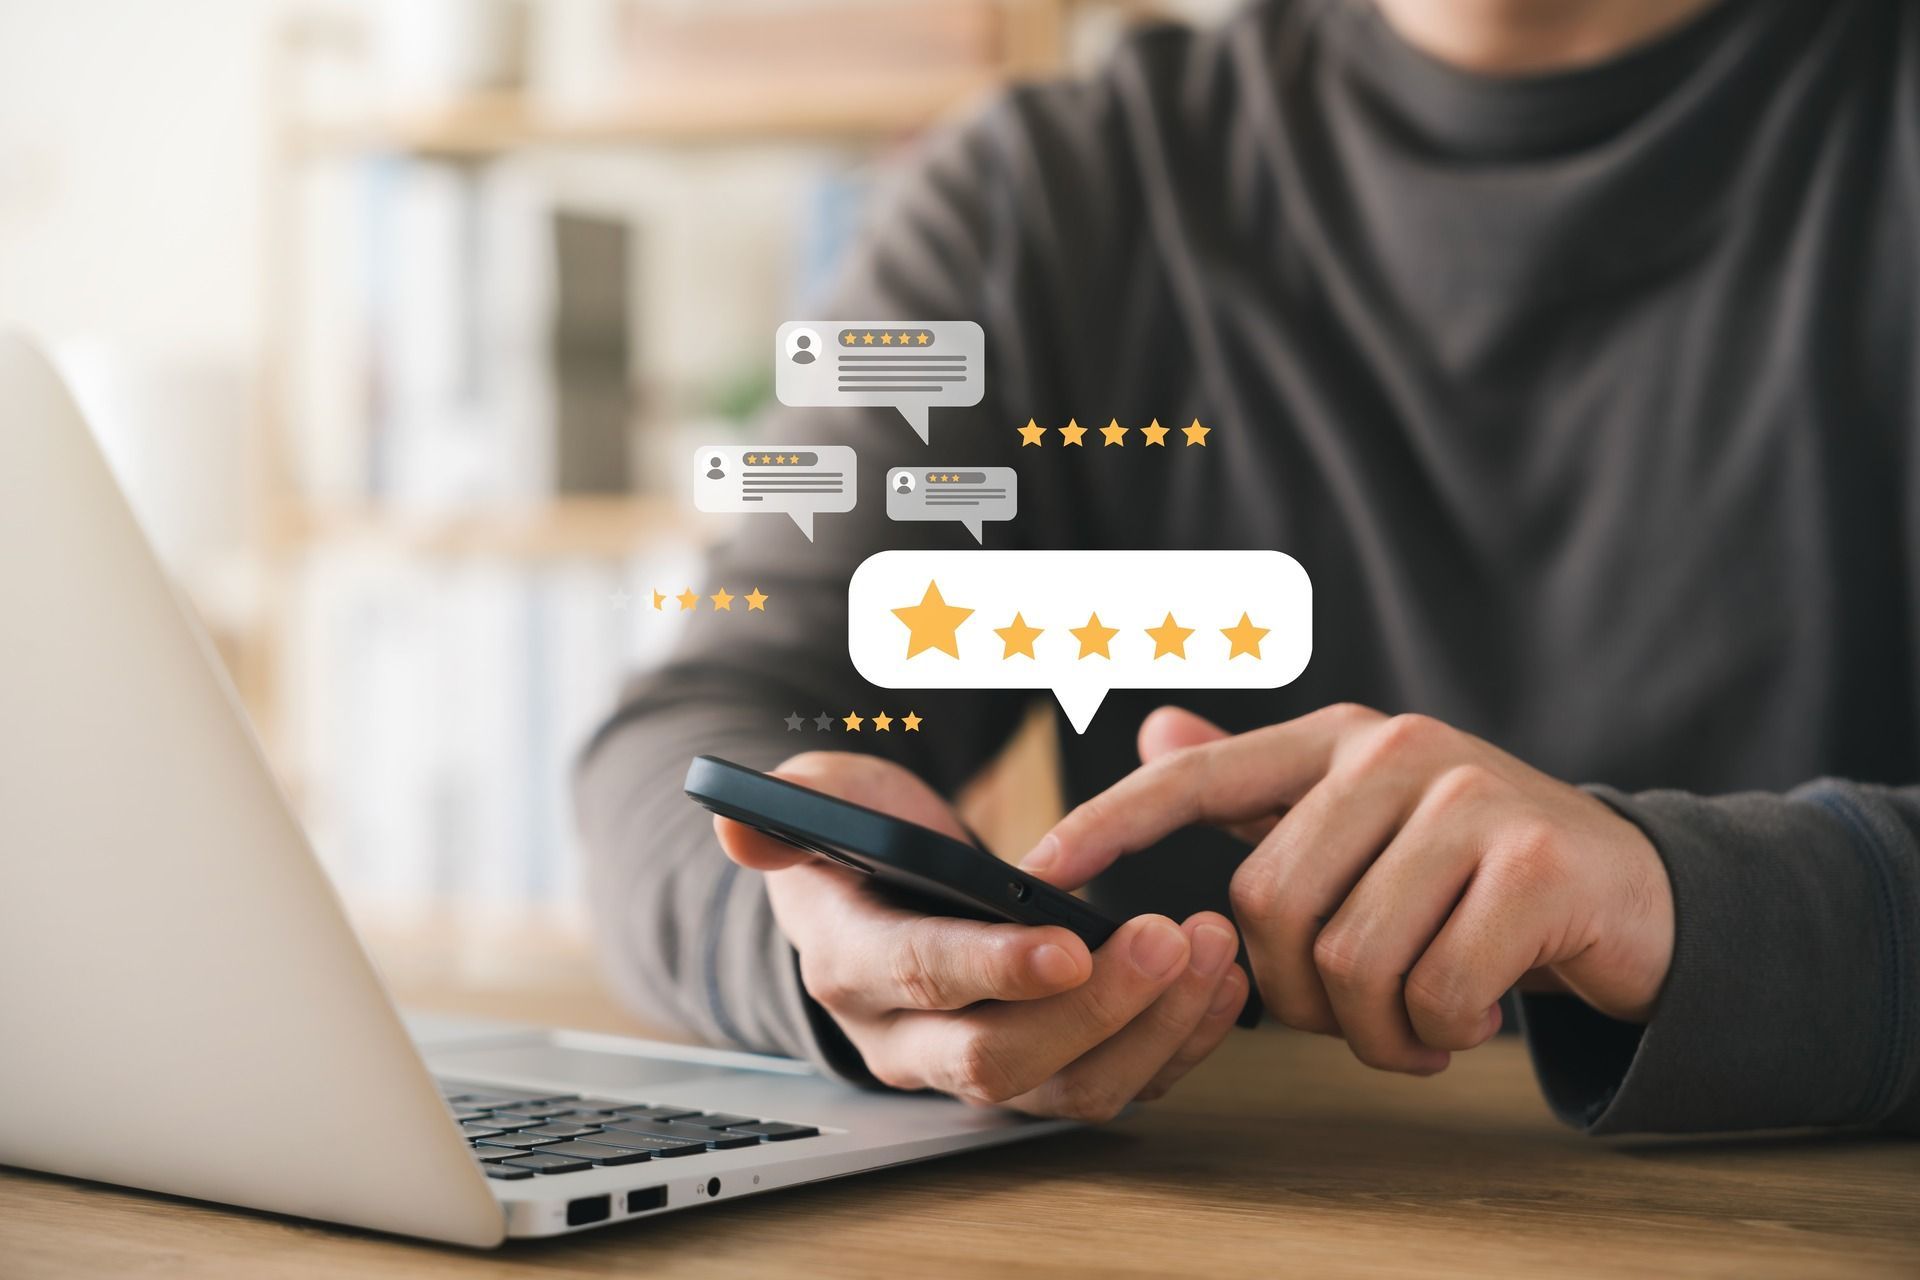 Step By Step Guide To Leave A Google Review
